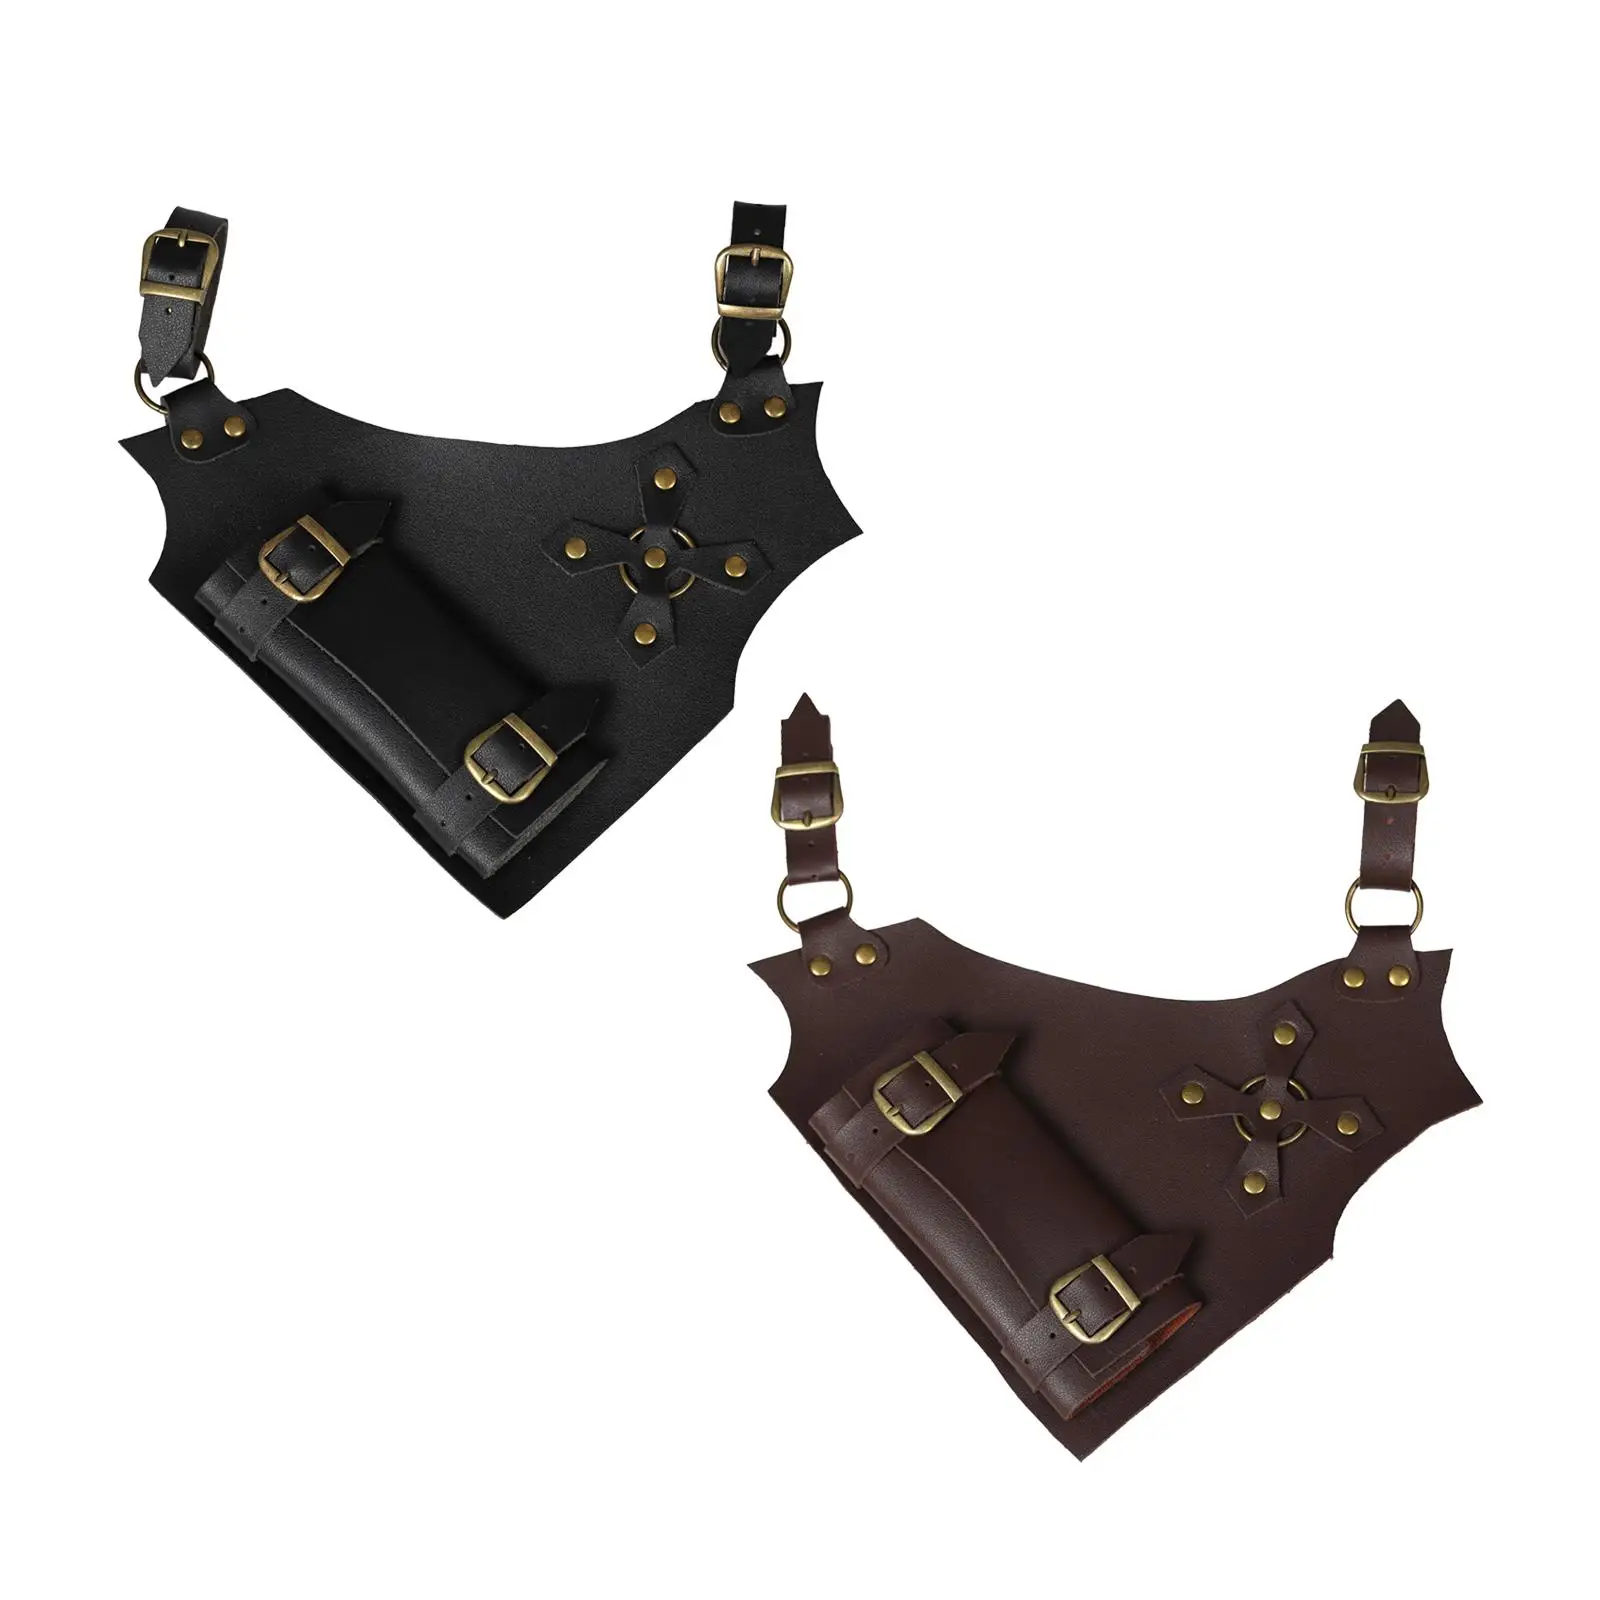 PU Leather Sword Display Belt Sheath for Cosplay for Fancy Dress